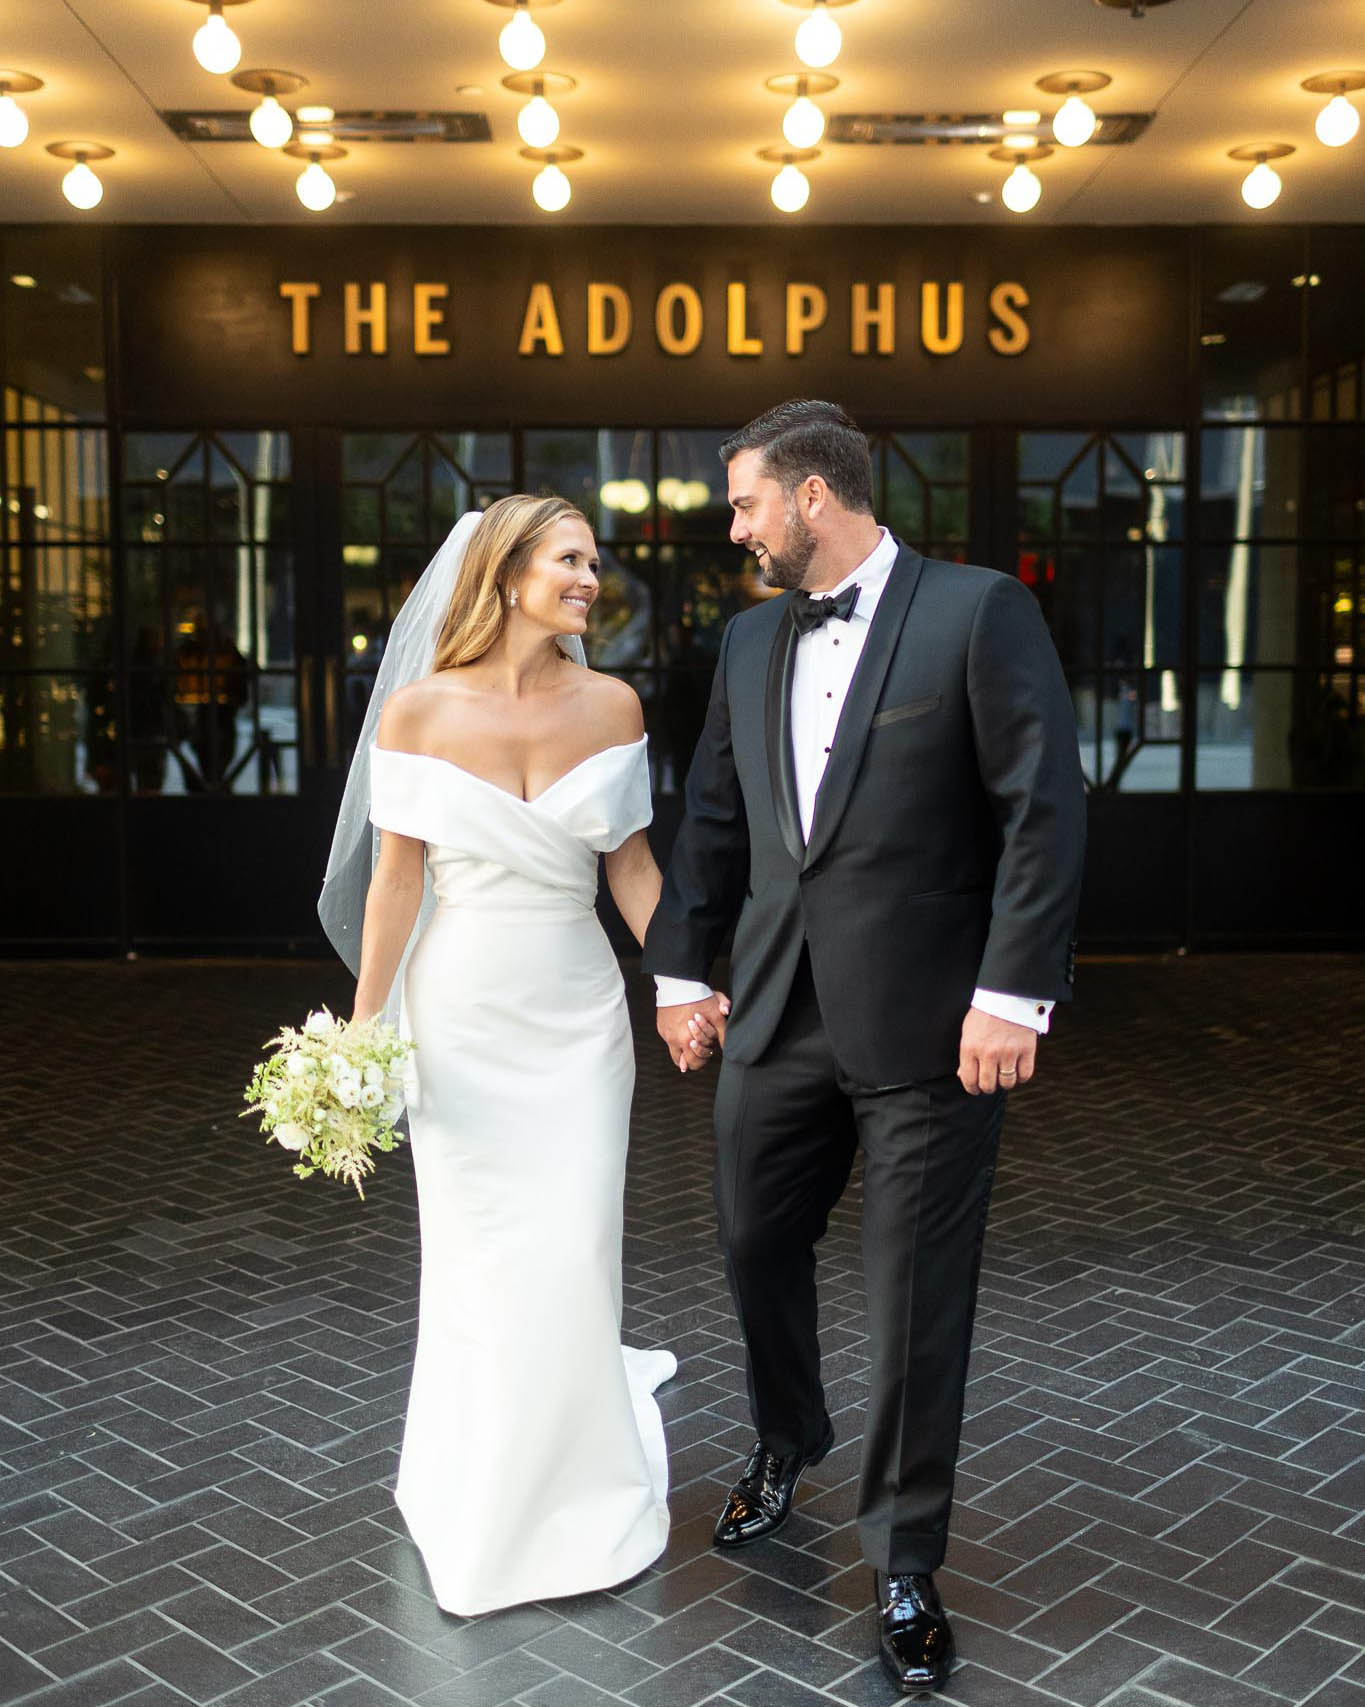 A Night to Remember at the Adolphus